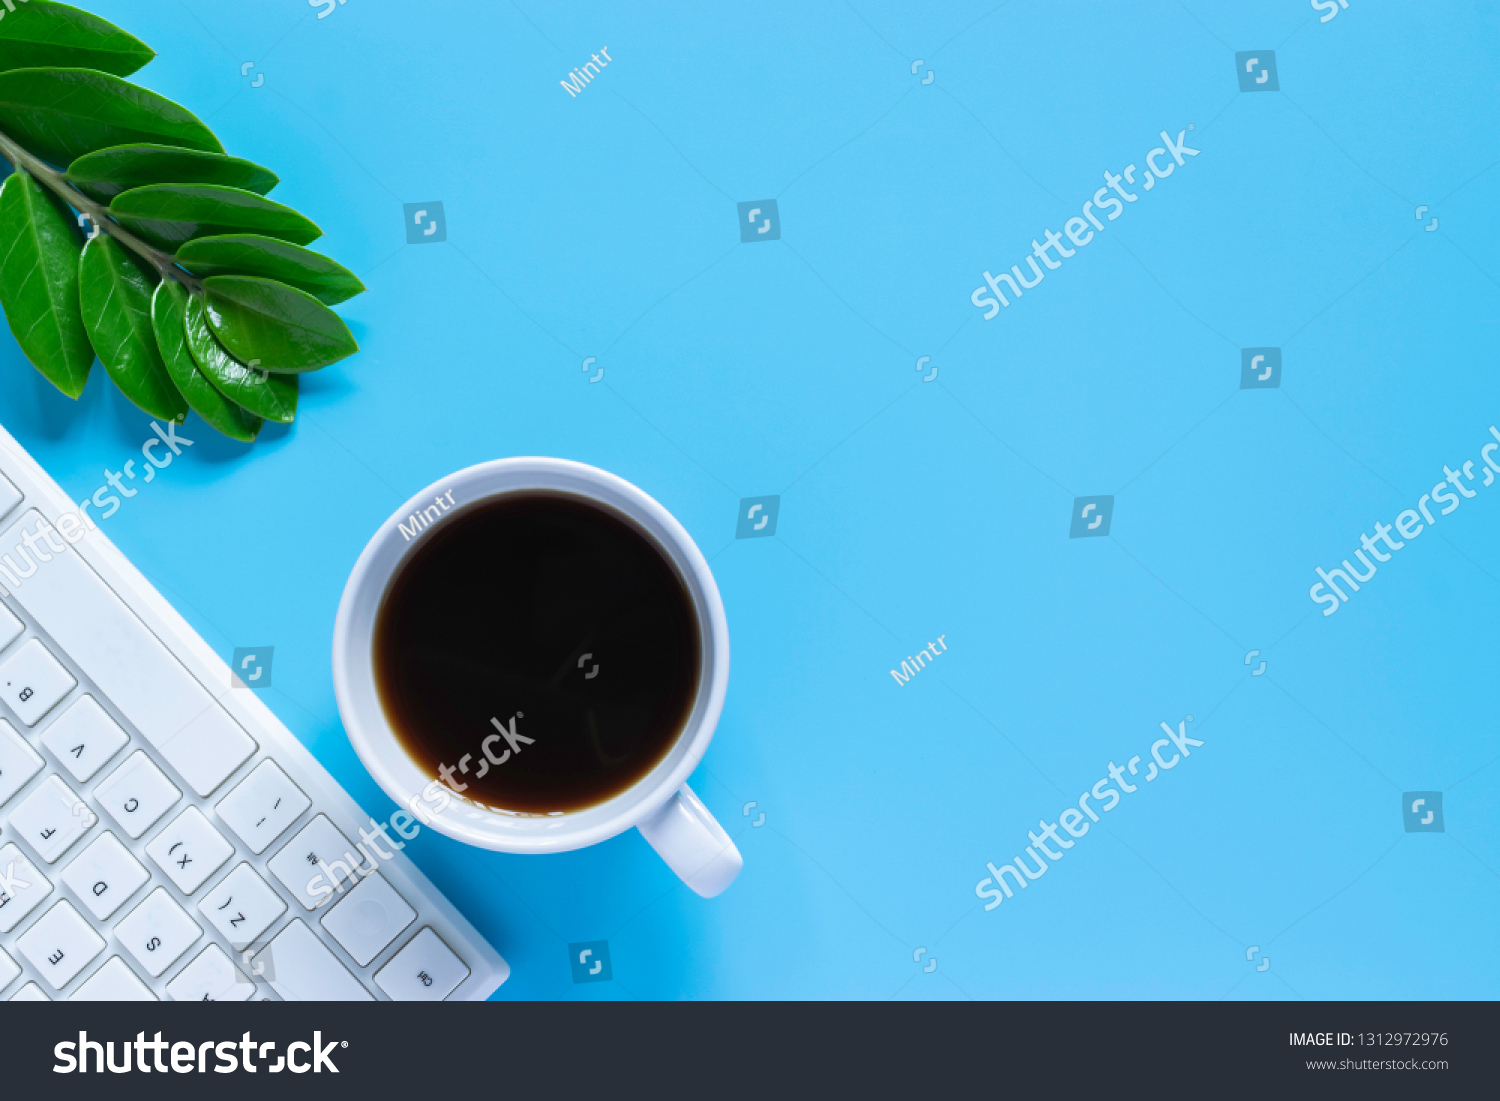 Top view keyboard,notebook,pen, or object for office supply concept on blue background. #1312972976